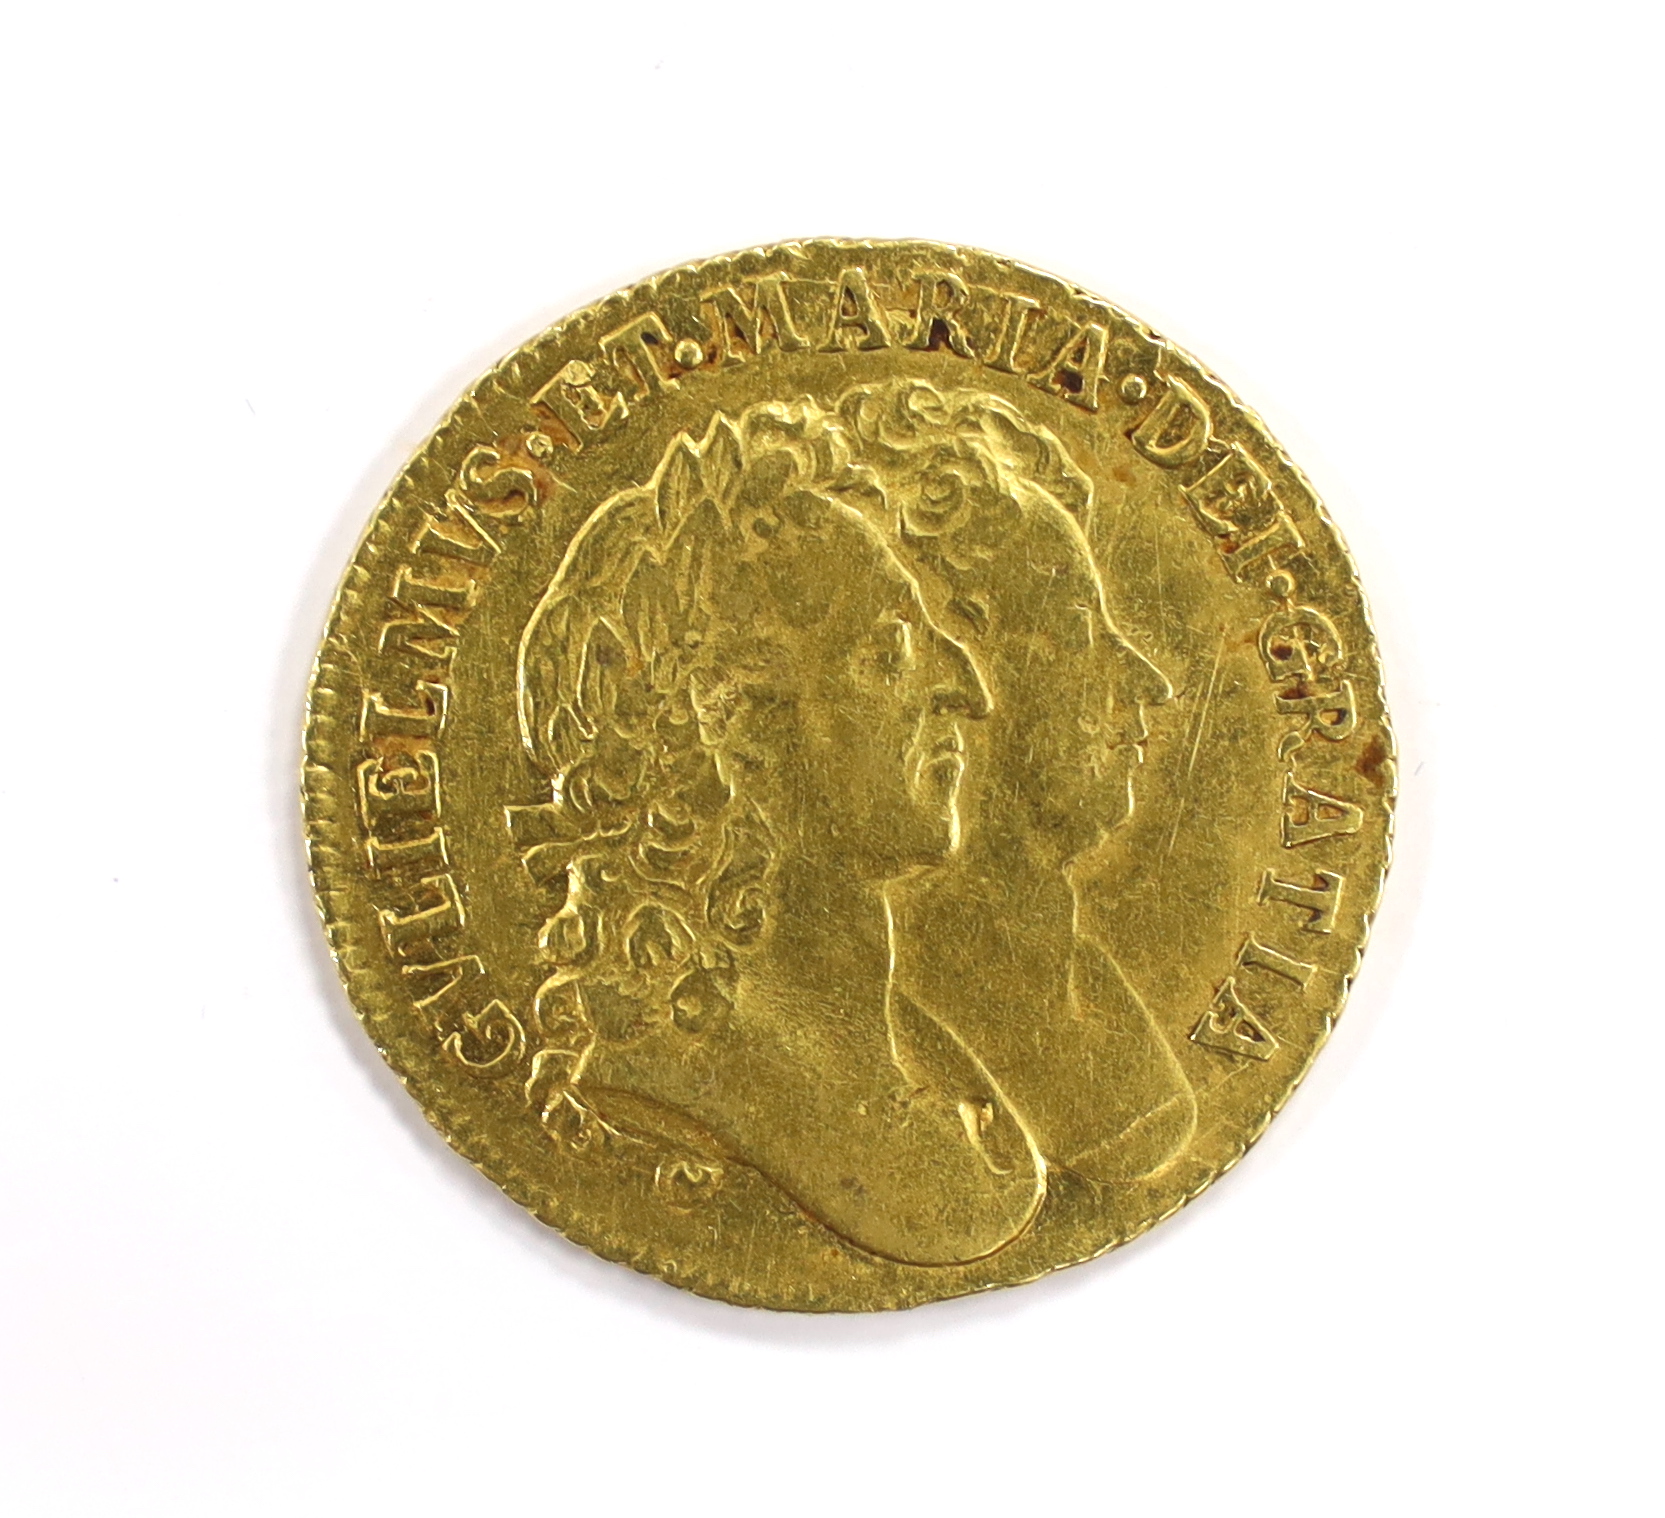 British gold coins - A William and Mary gold guinea, 1689, probably demounted at 12 o’clock, otherwise good Fine (S3426), Provenance bought from Richard Lobel and co Ltd, London, 7th March 1977 for £275